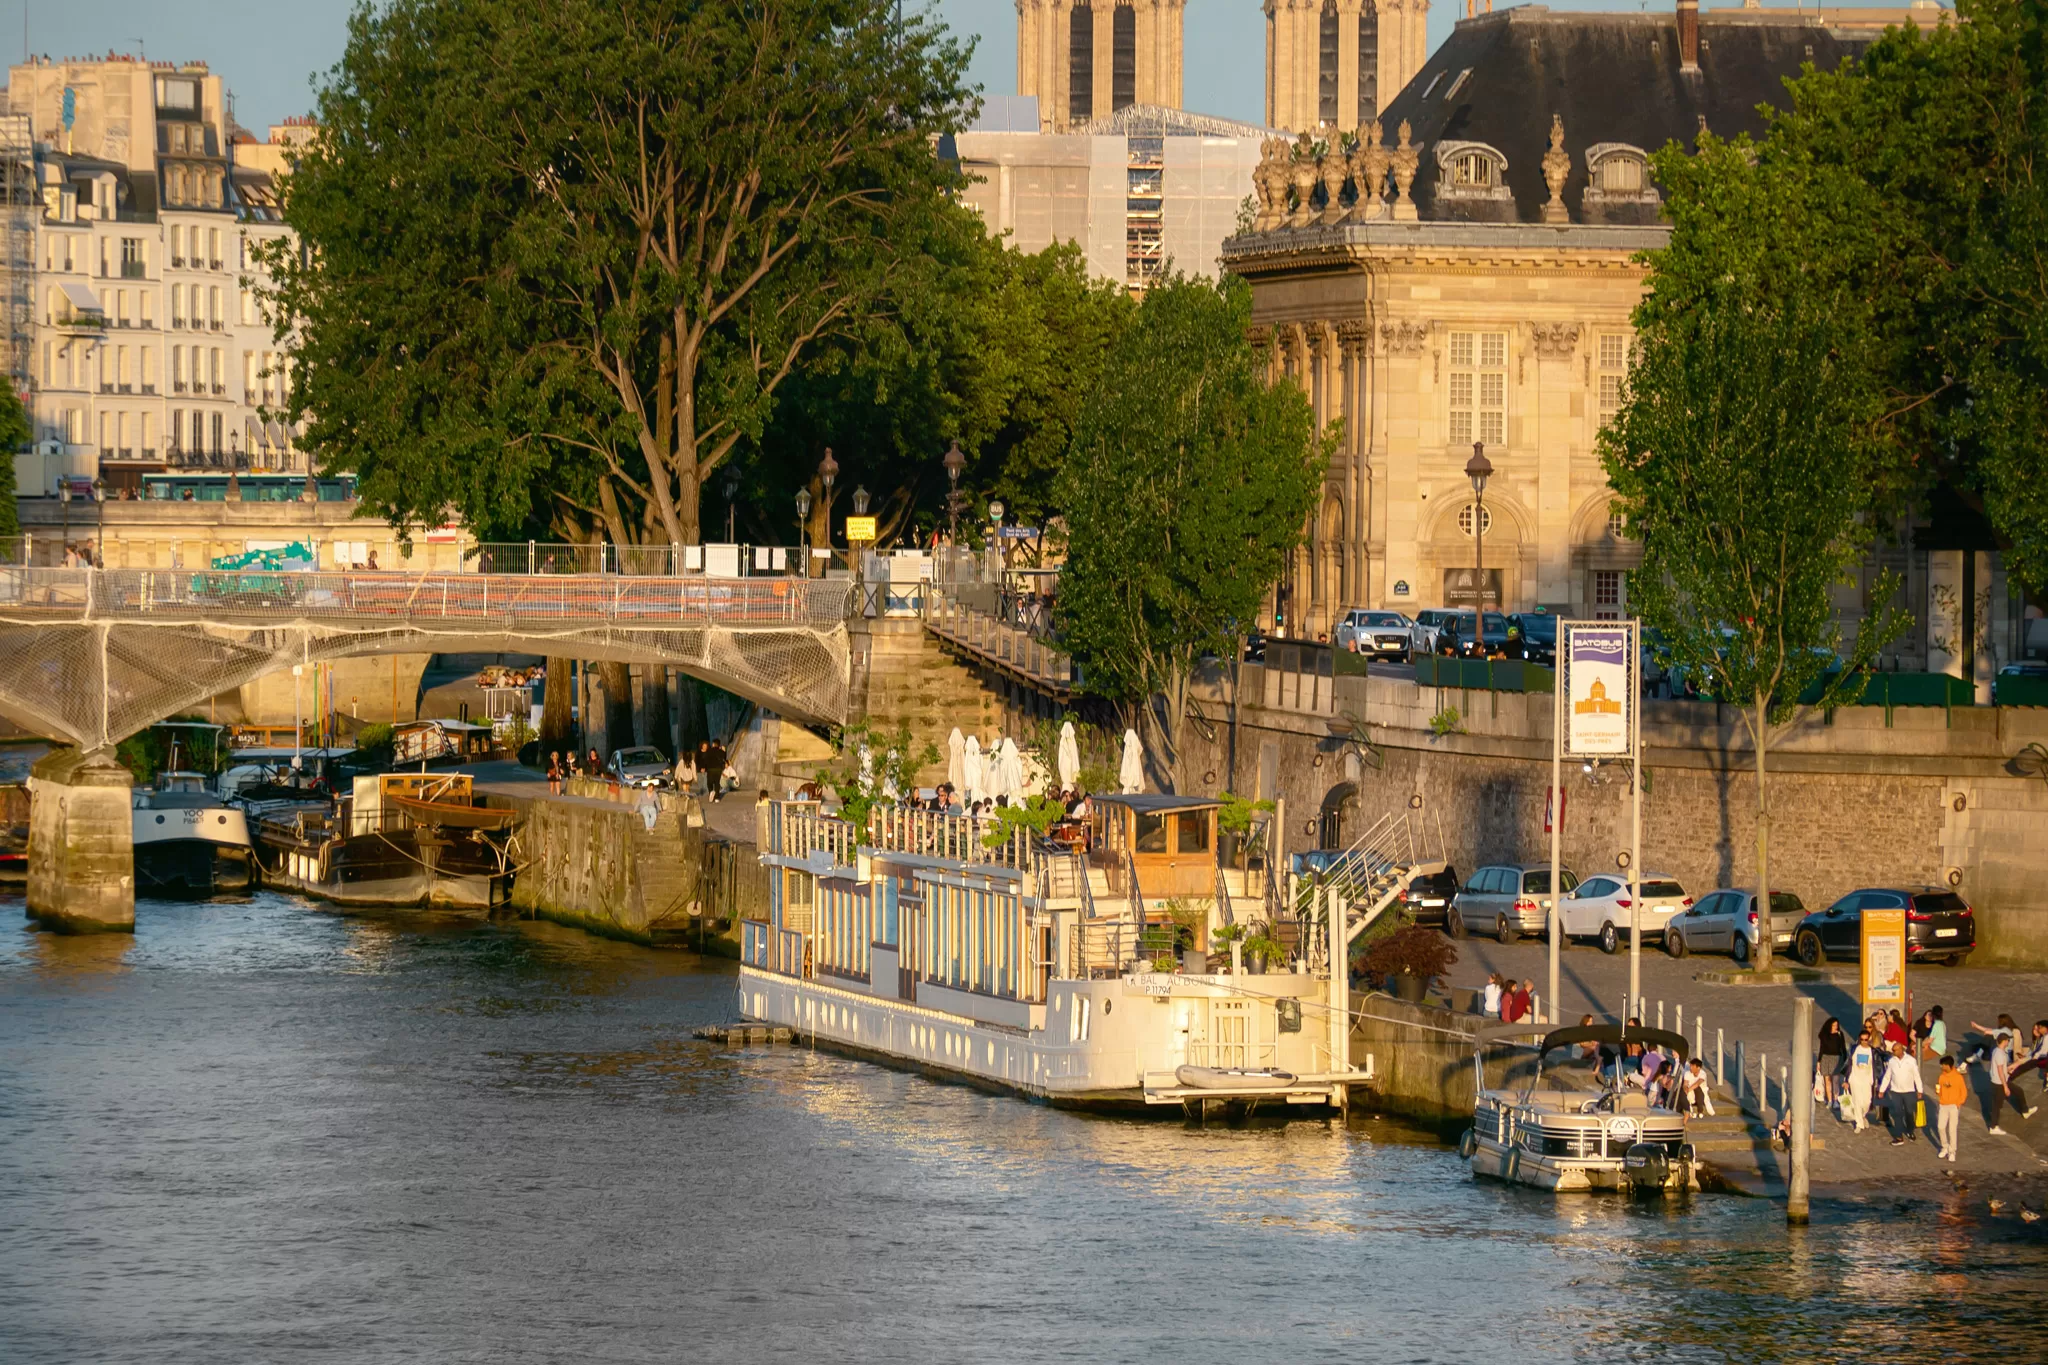 Boats on the Seine River in Paris